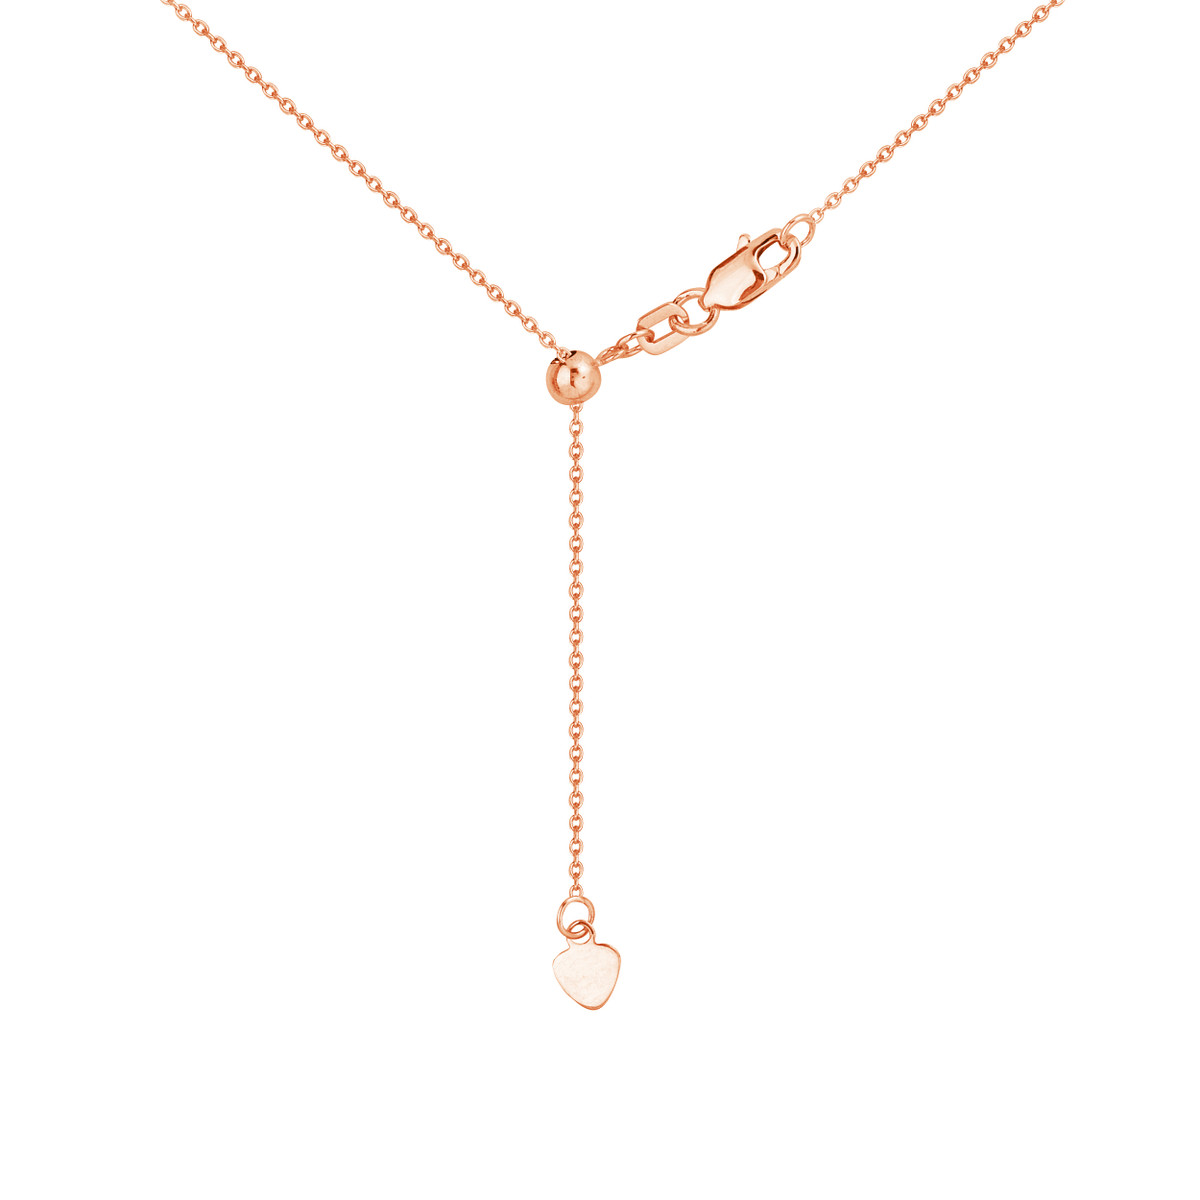 14kt Adjustable Cable Link Chain